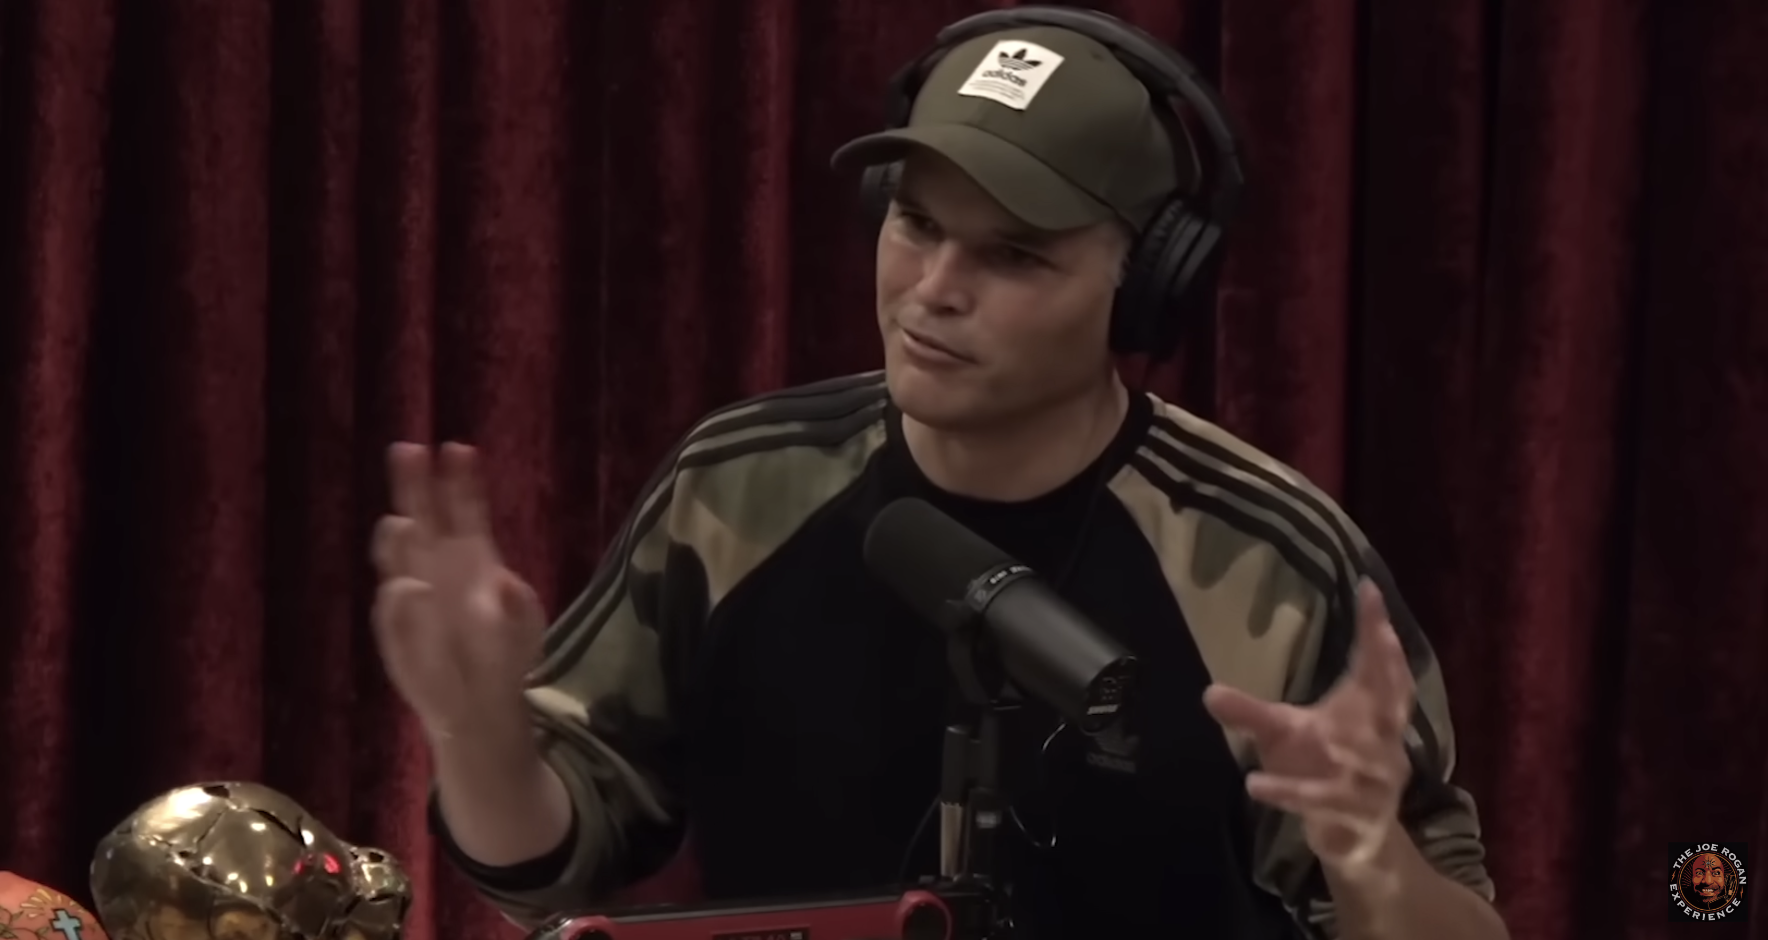 Matt Taibbi Interview on The Joe Rogan Experience Podcast – Surprised by FBI & Twitter’s Collusion; Russiagate Info in Twitter Files